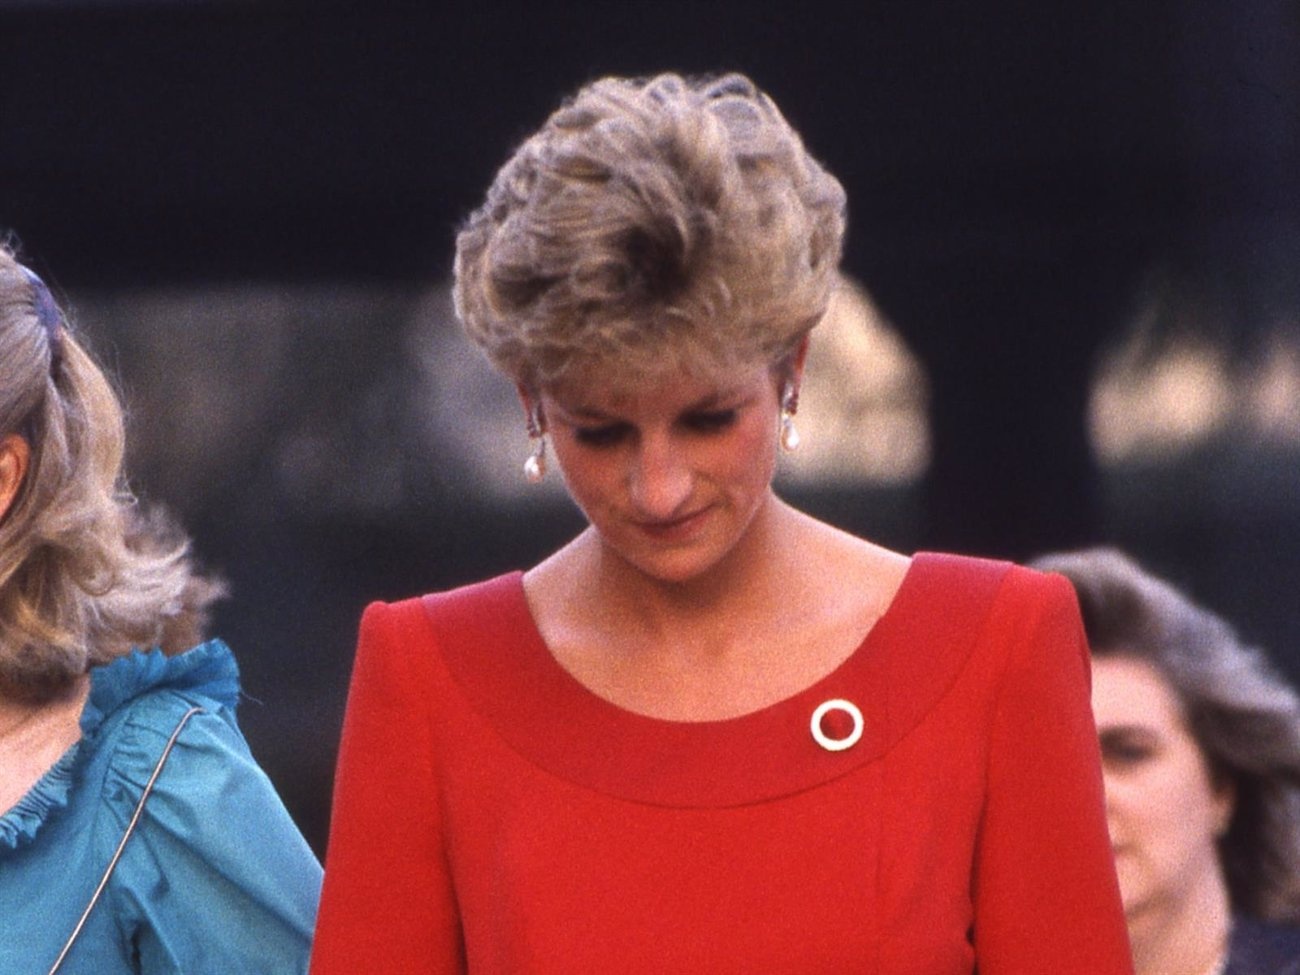 The most difficult Christmas for Diana of Wales